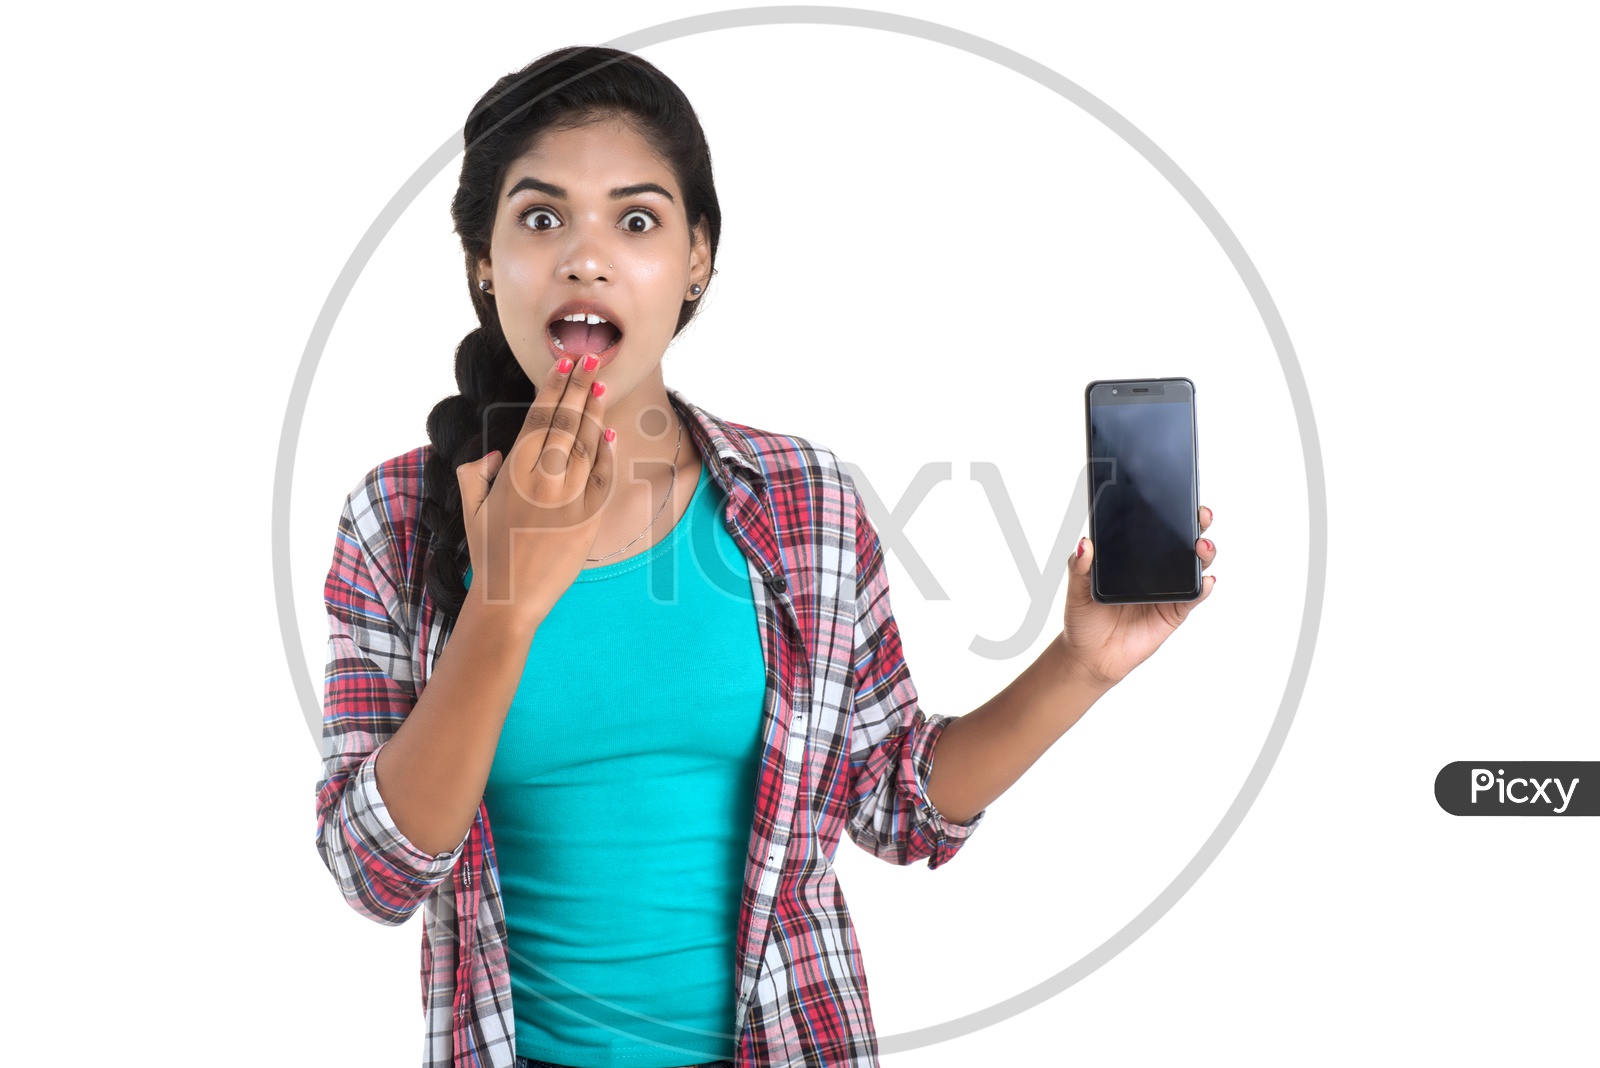 Pretty Indian Girl Showing Mobile Phone Screen and With a Expression On an Isolated White Background